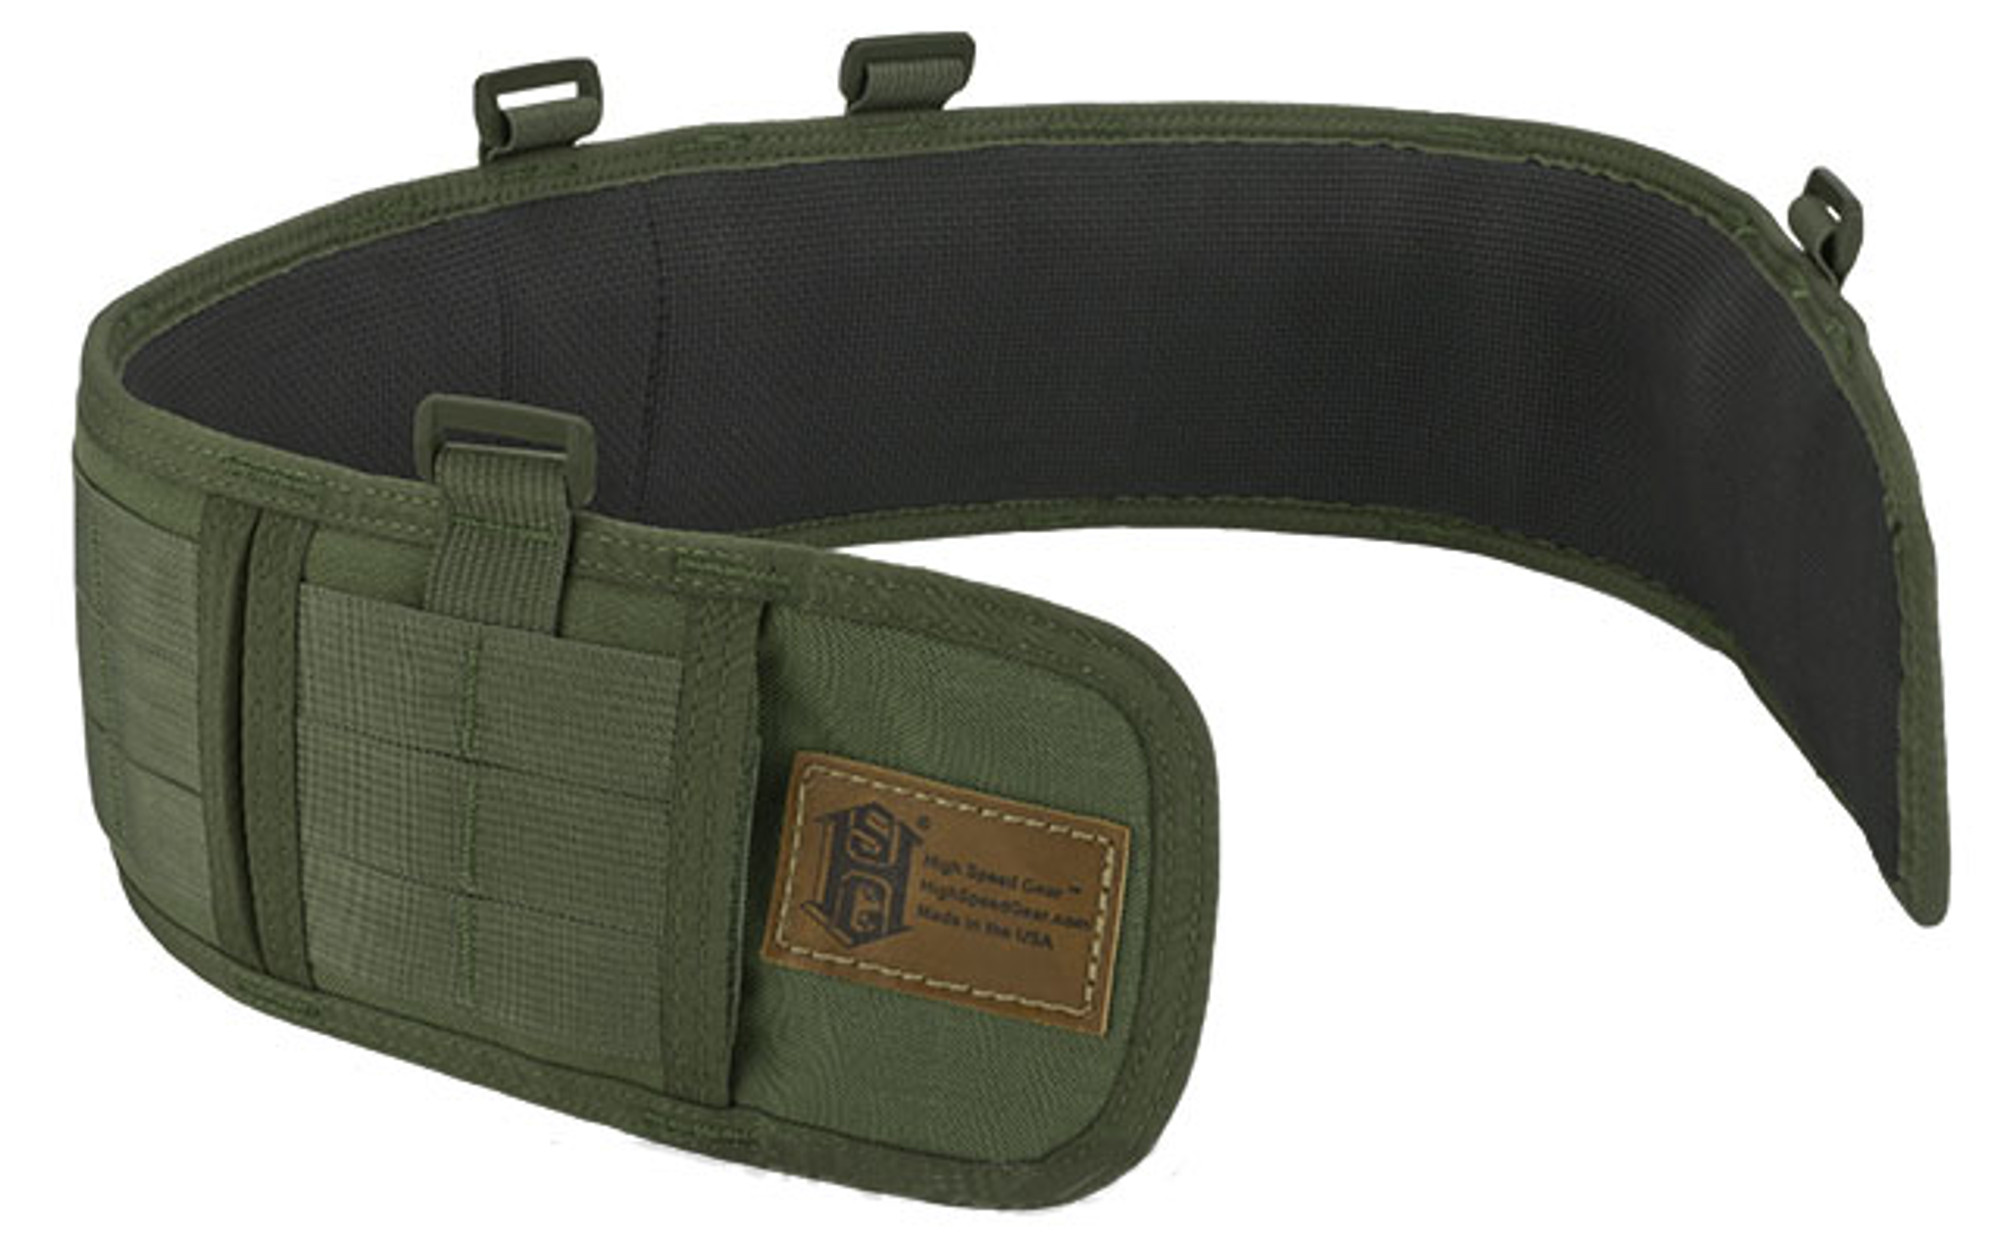 HSGI Slotted Sure-Grip Padded Duty Belt (Color: OD Green / Small 30.5")